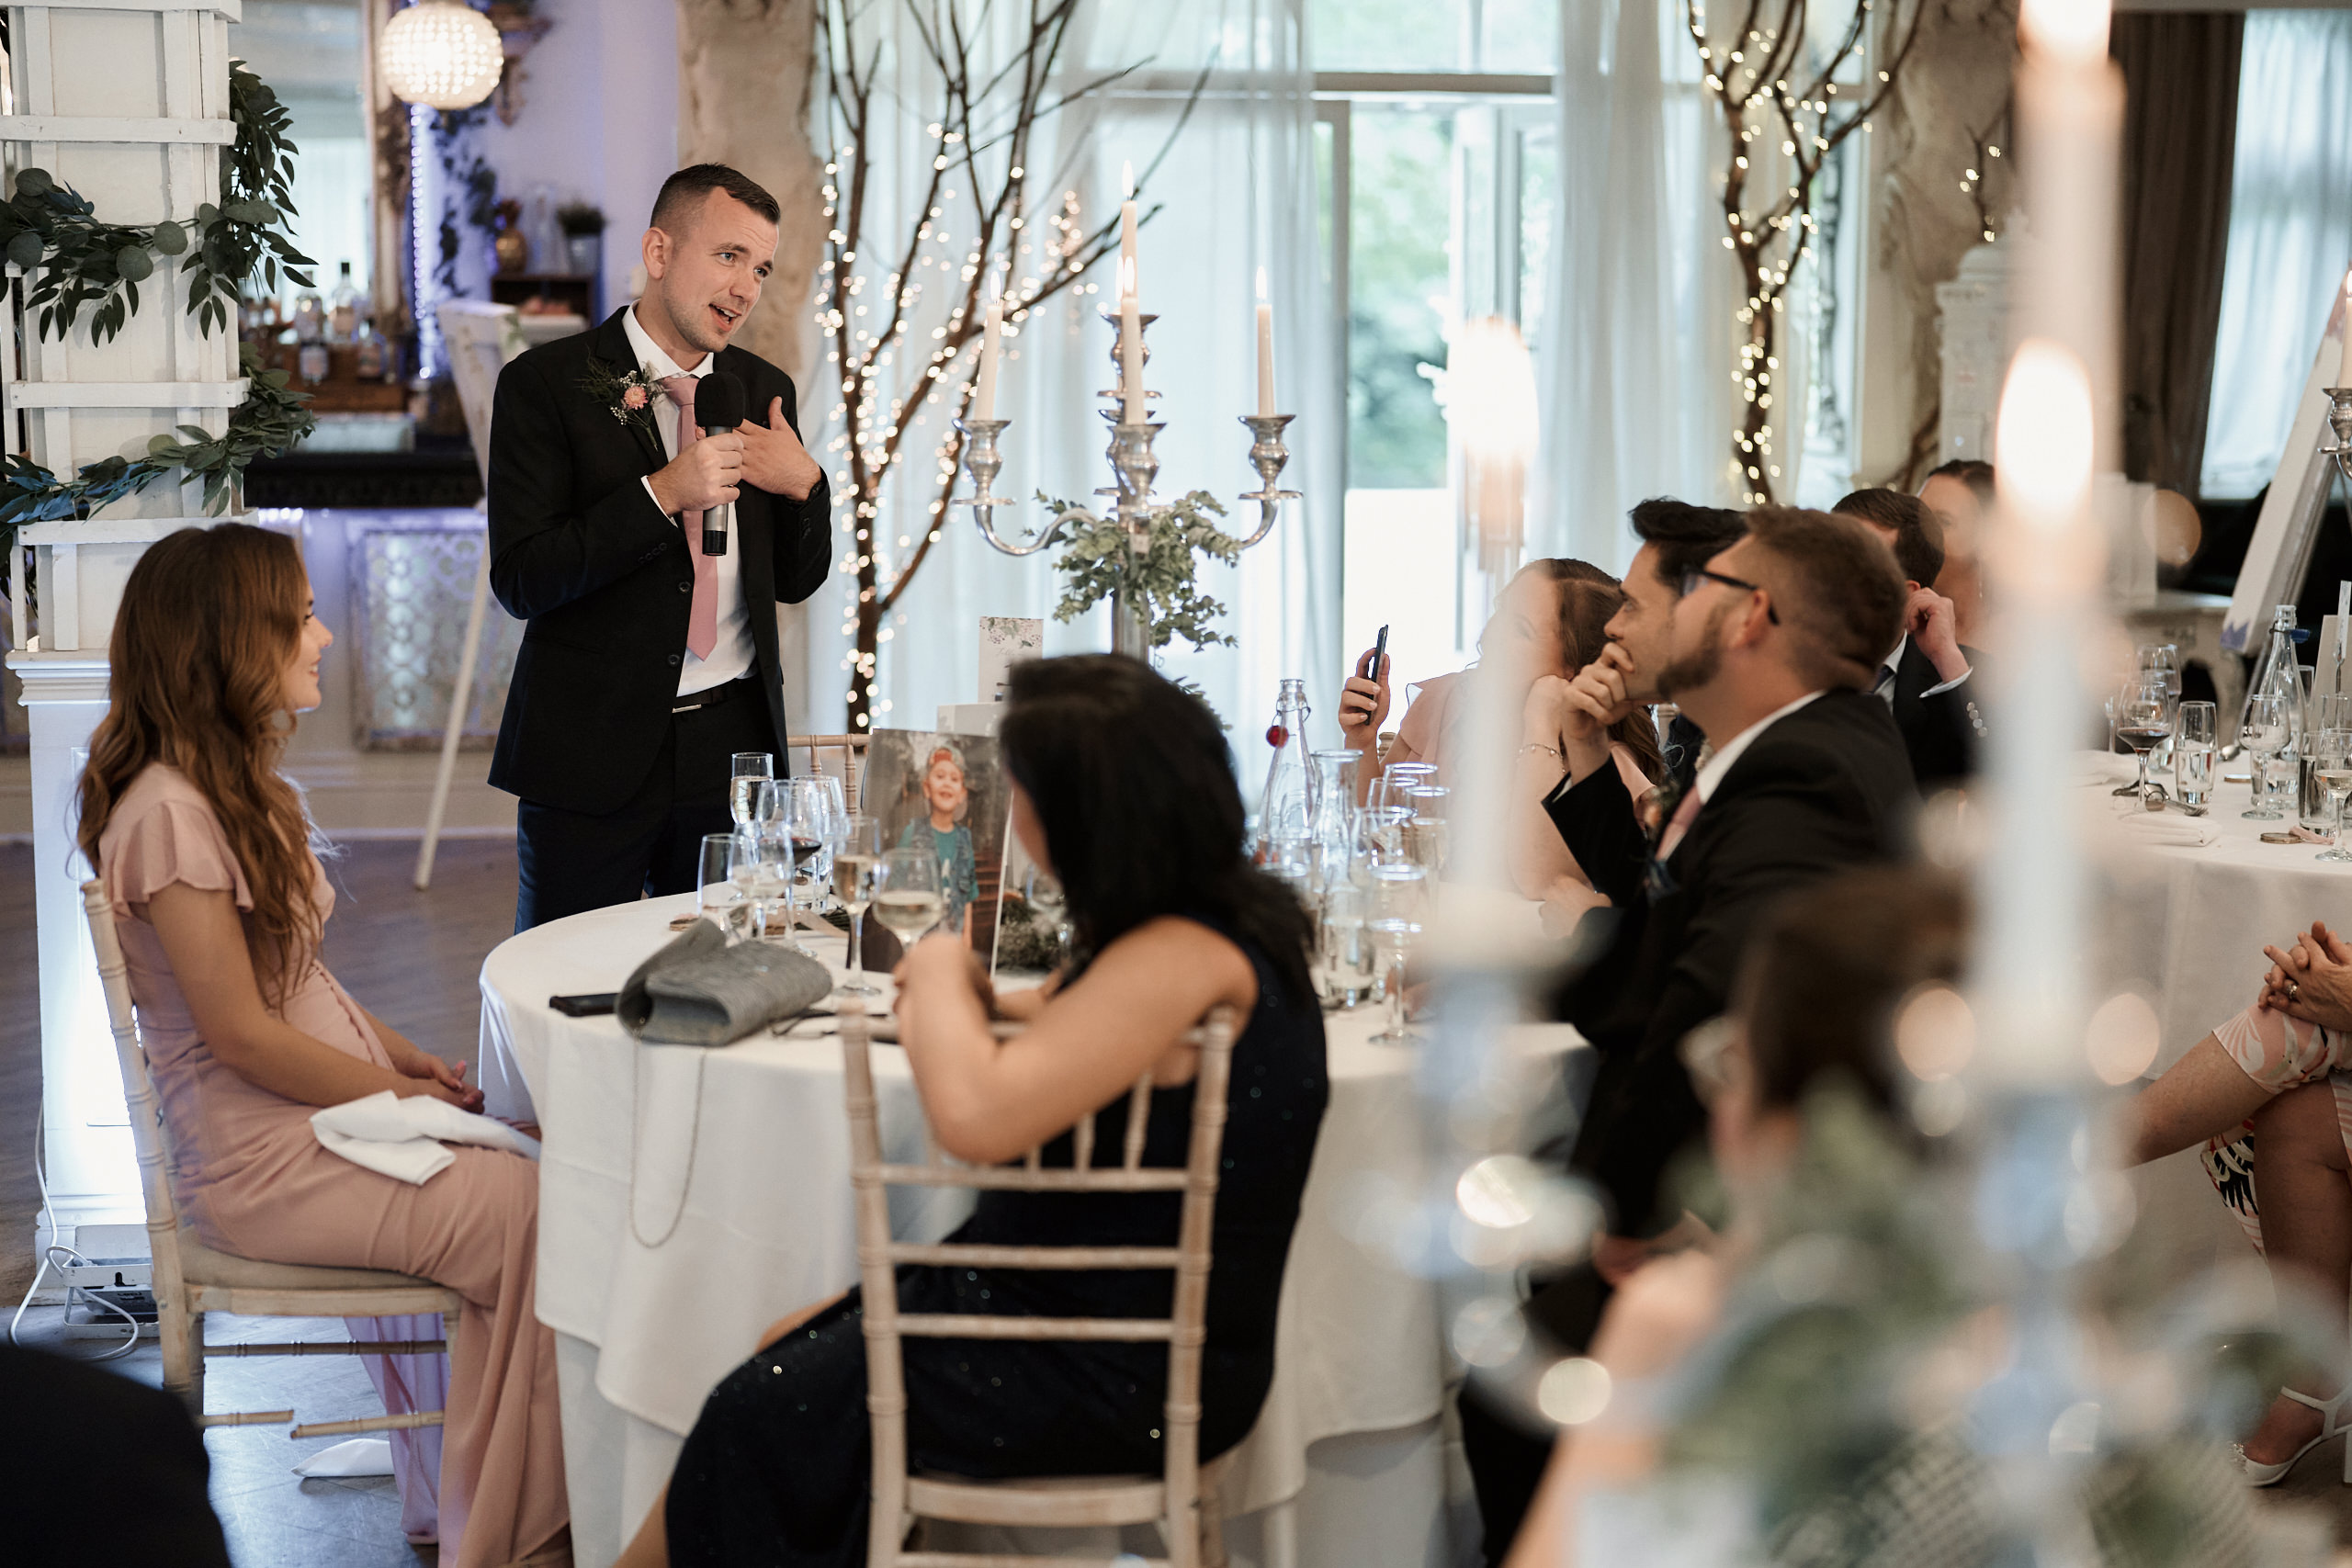 A guy speaking at a wedding party.